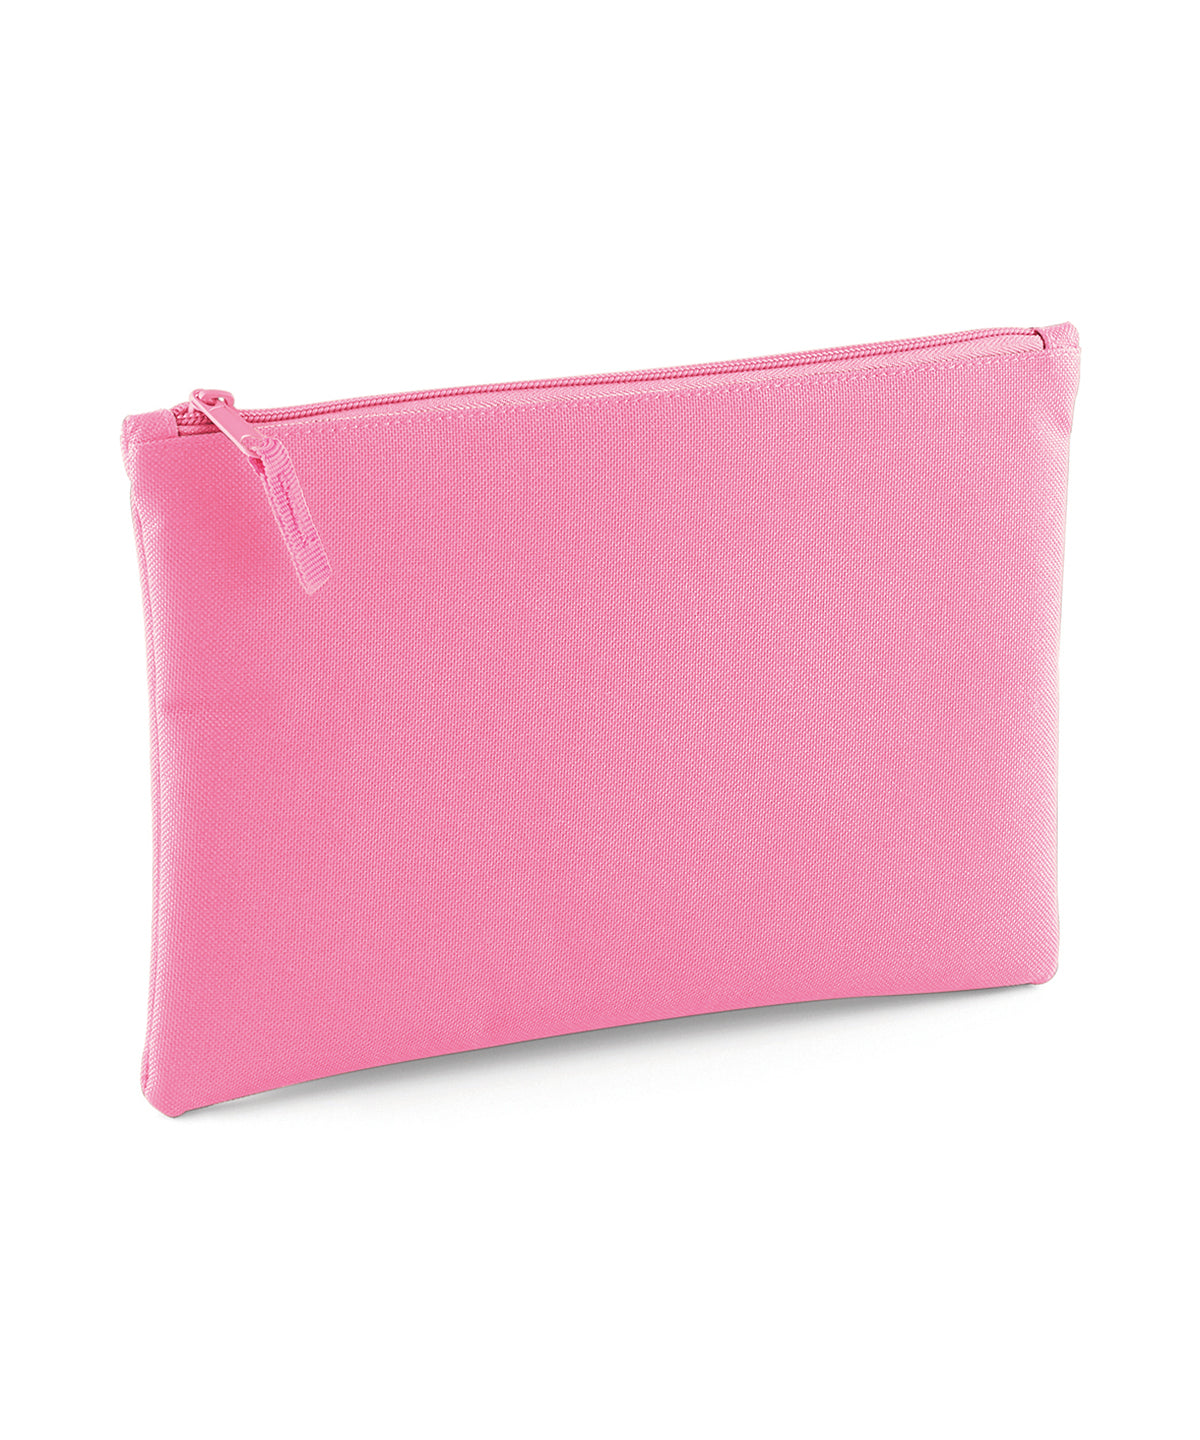 Personalised Bags - Light Pink Bagbase Grab pouch